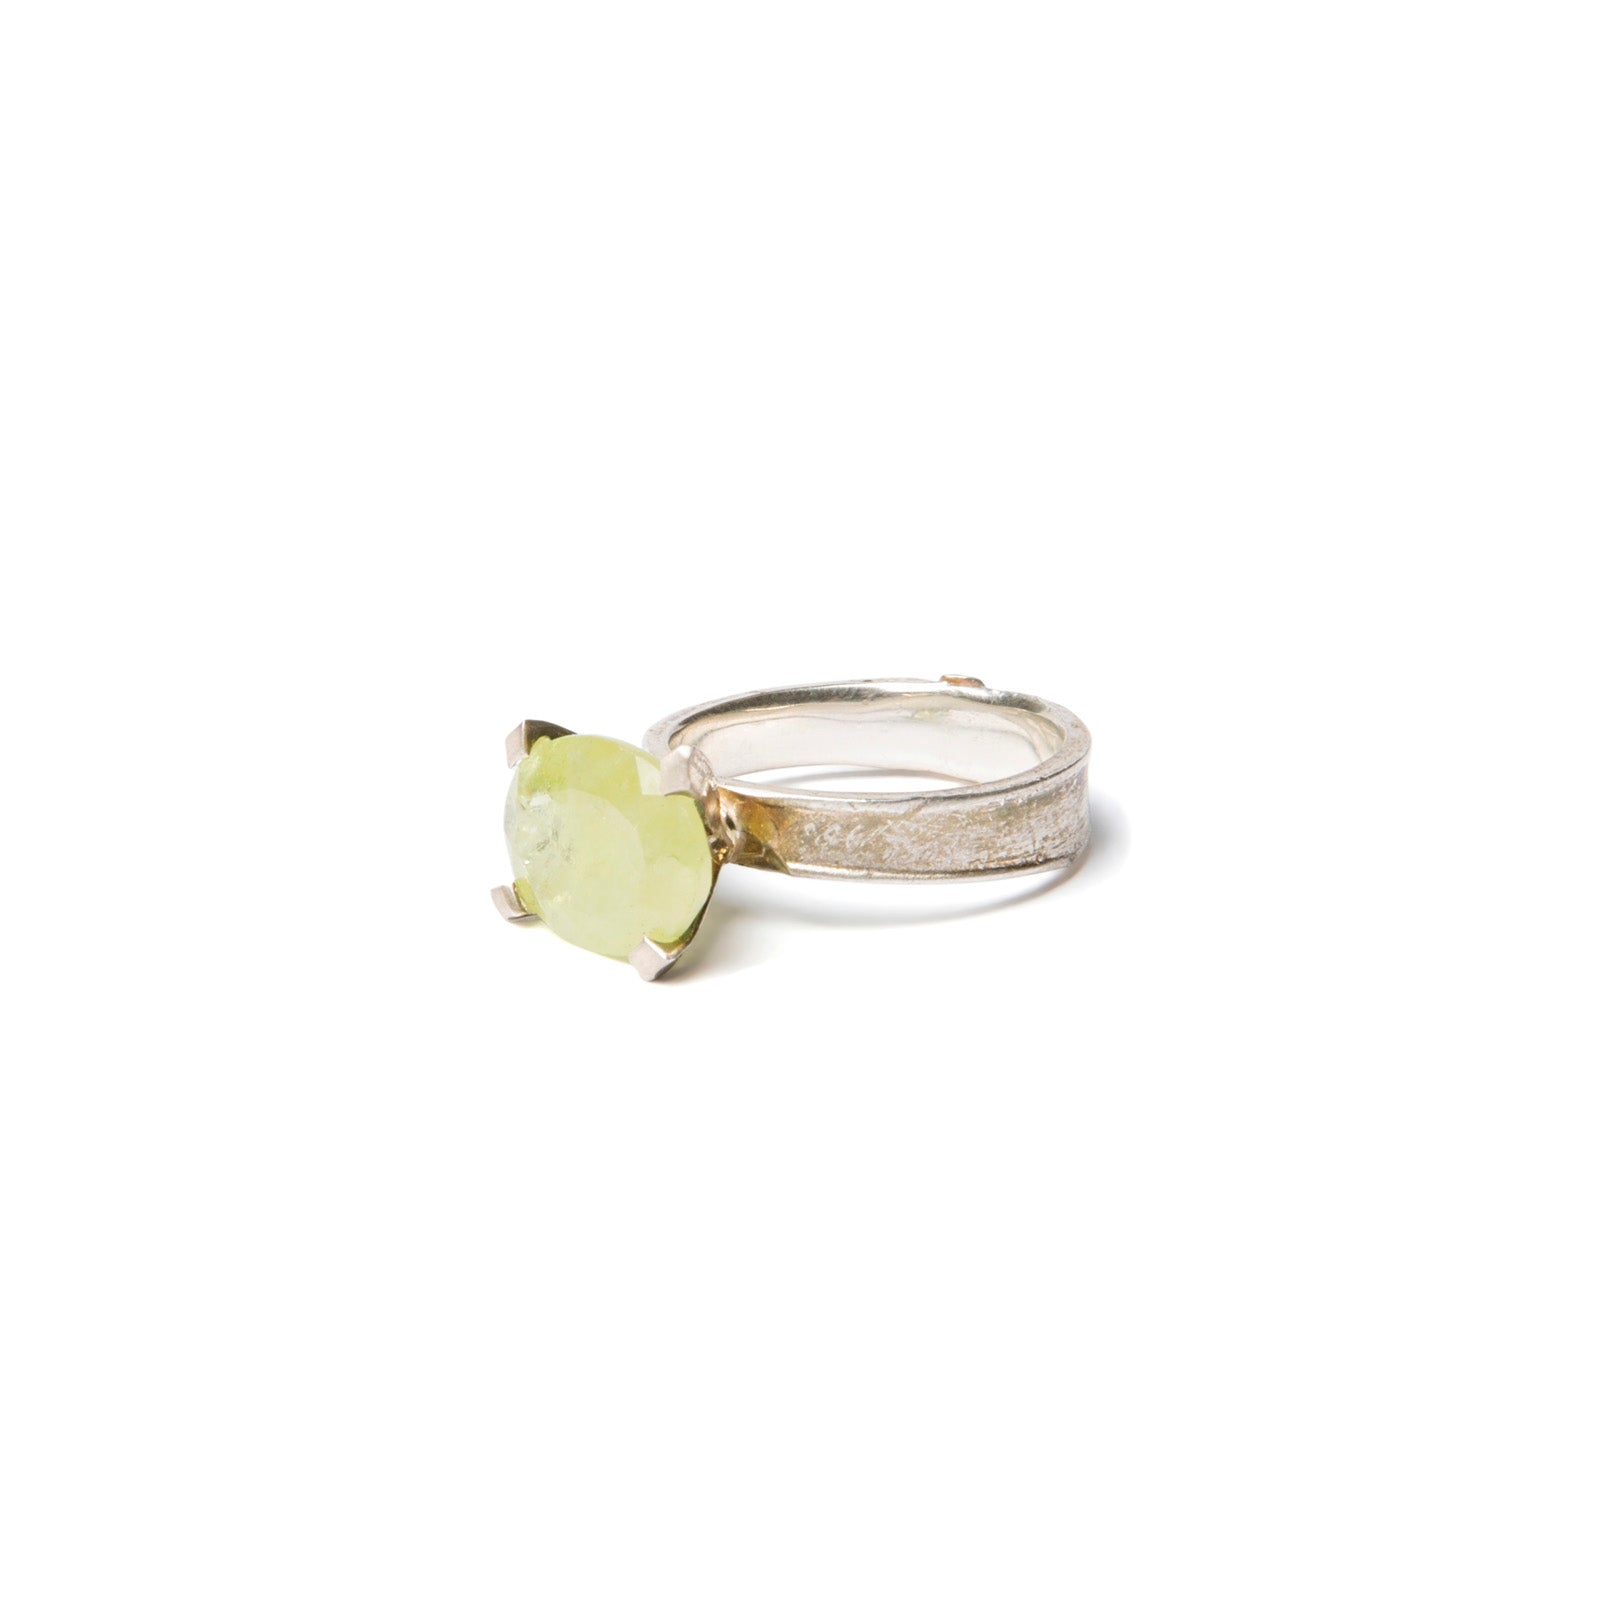 Rough solitaire with lime green stone